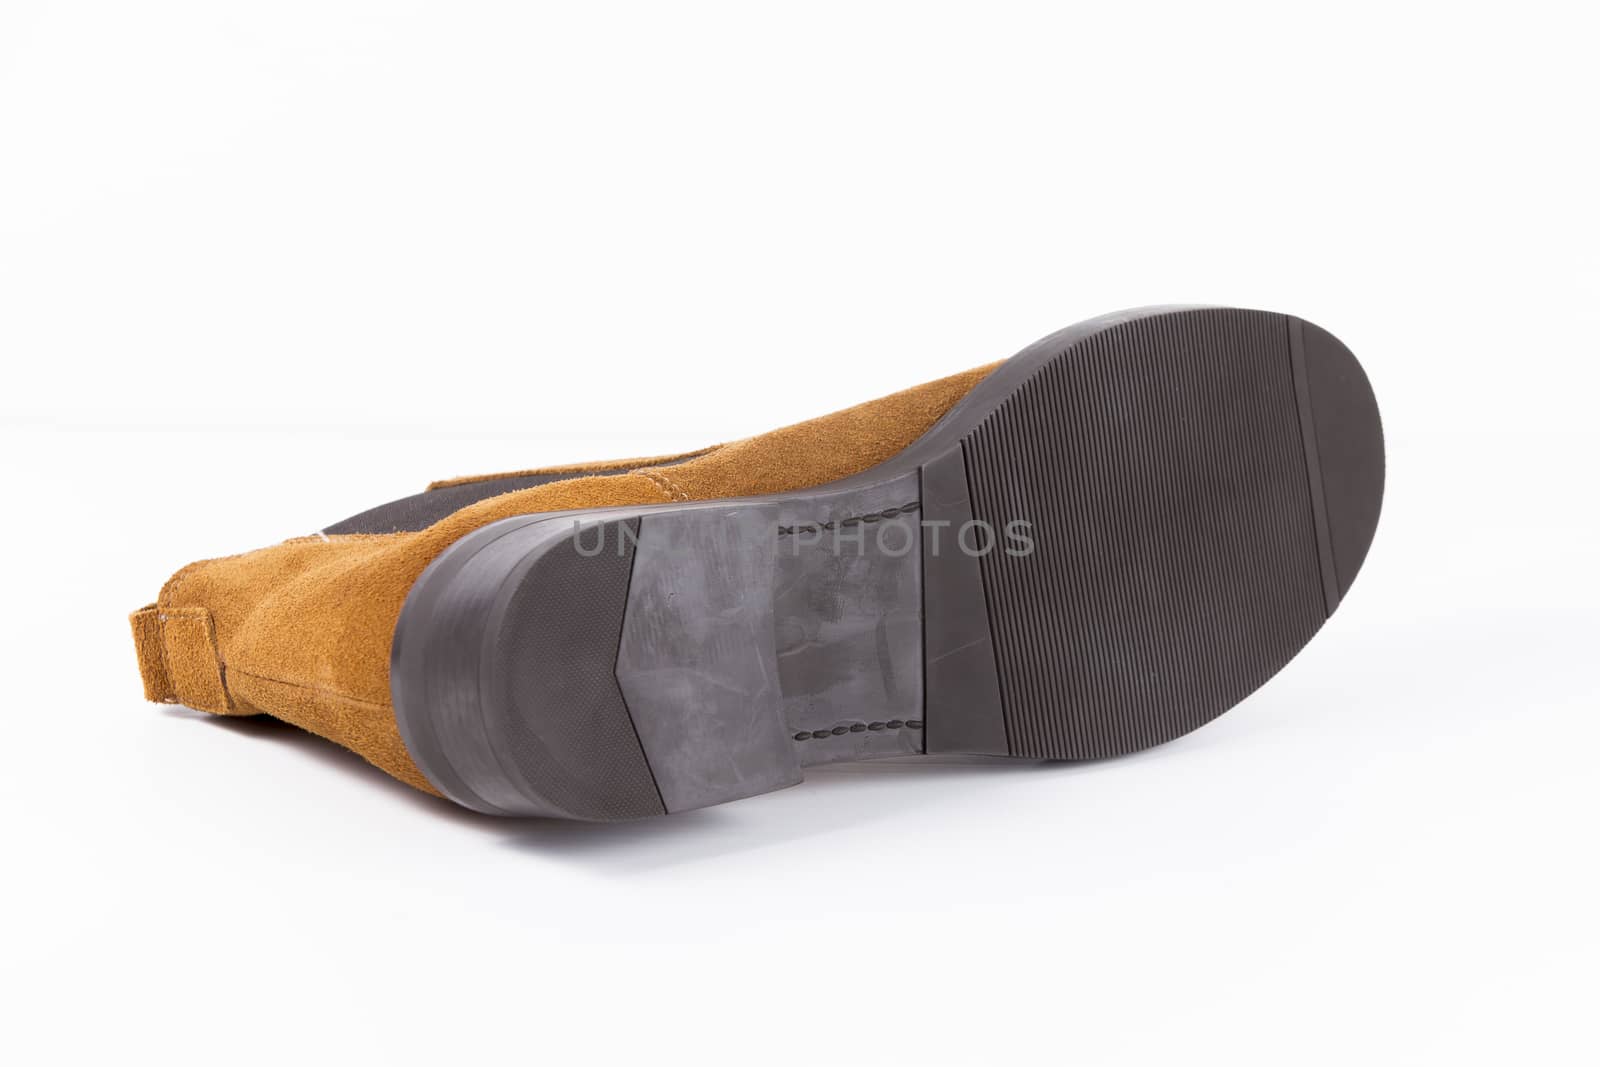 Brown leather boot on white background, isolated product.